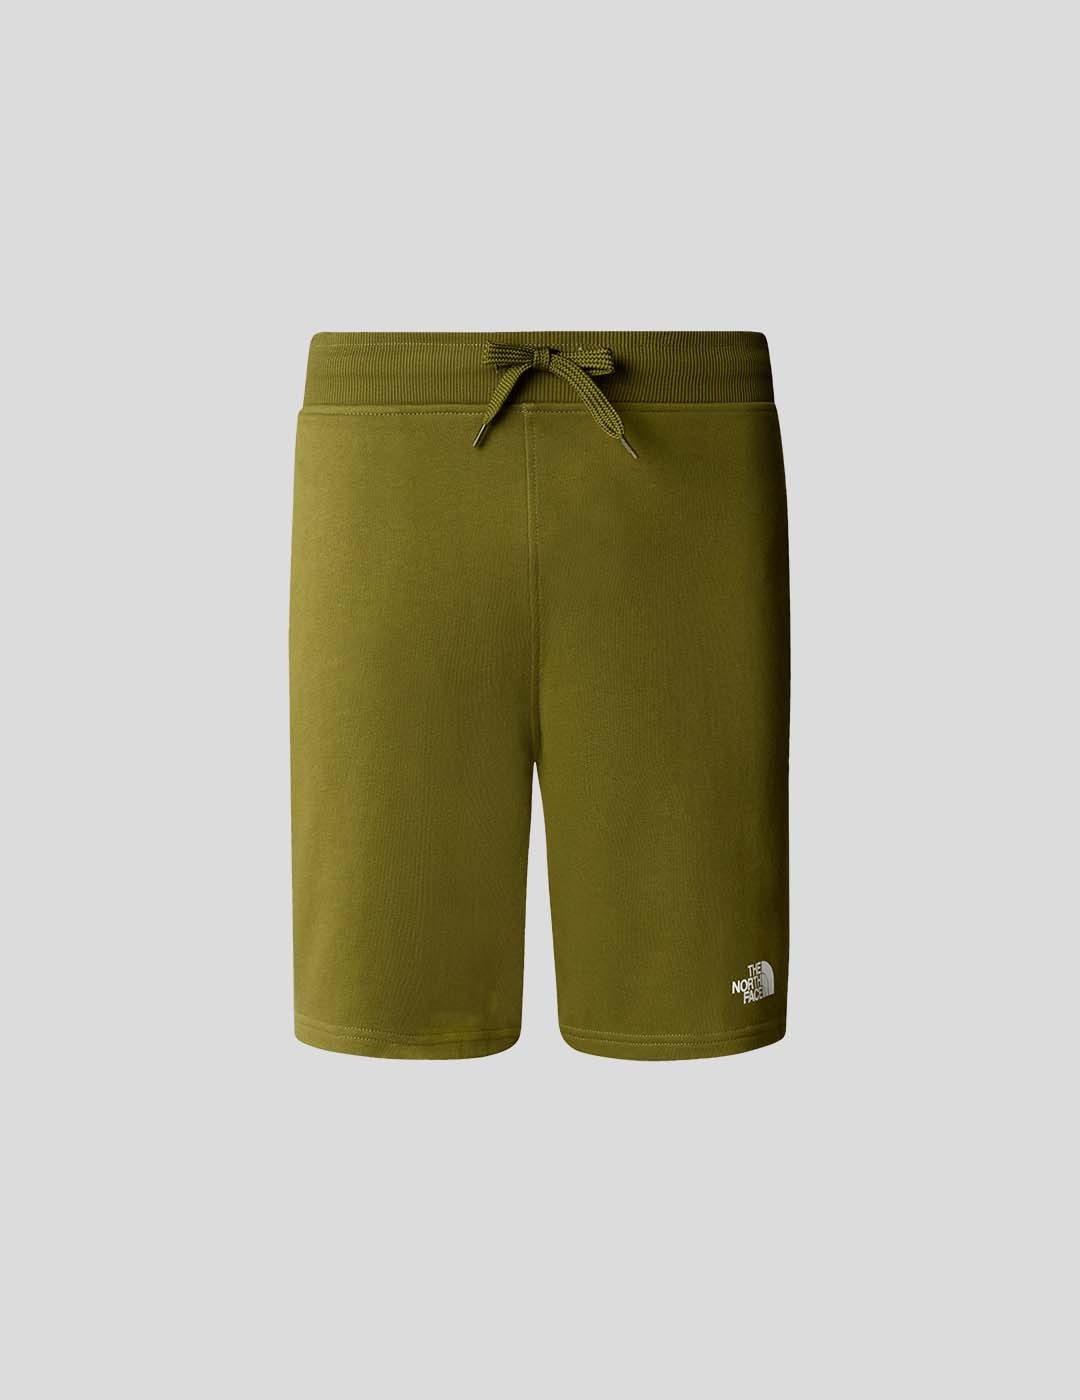 SHORTS THE NORTH FACE STANDARD SHORT LIGHT   FOREST OLIVE